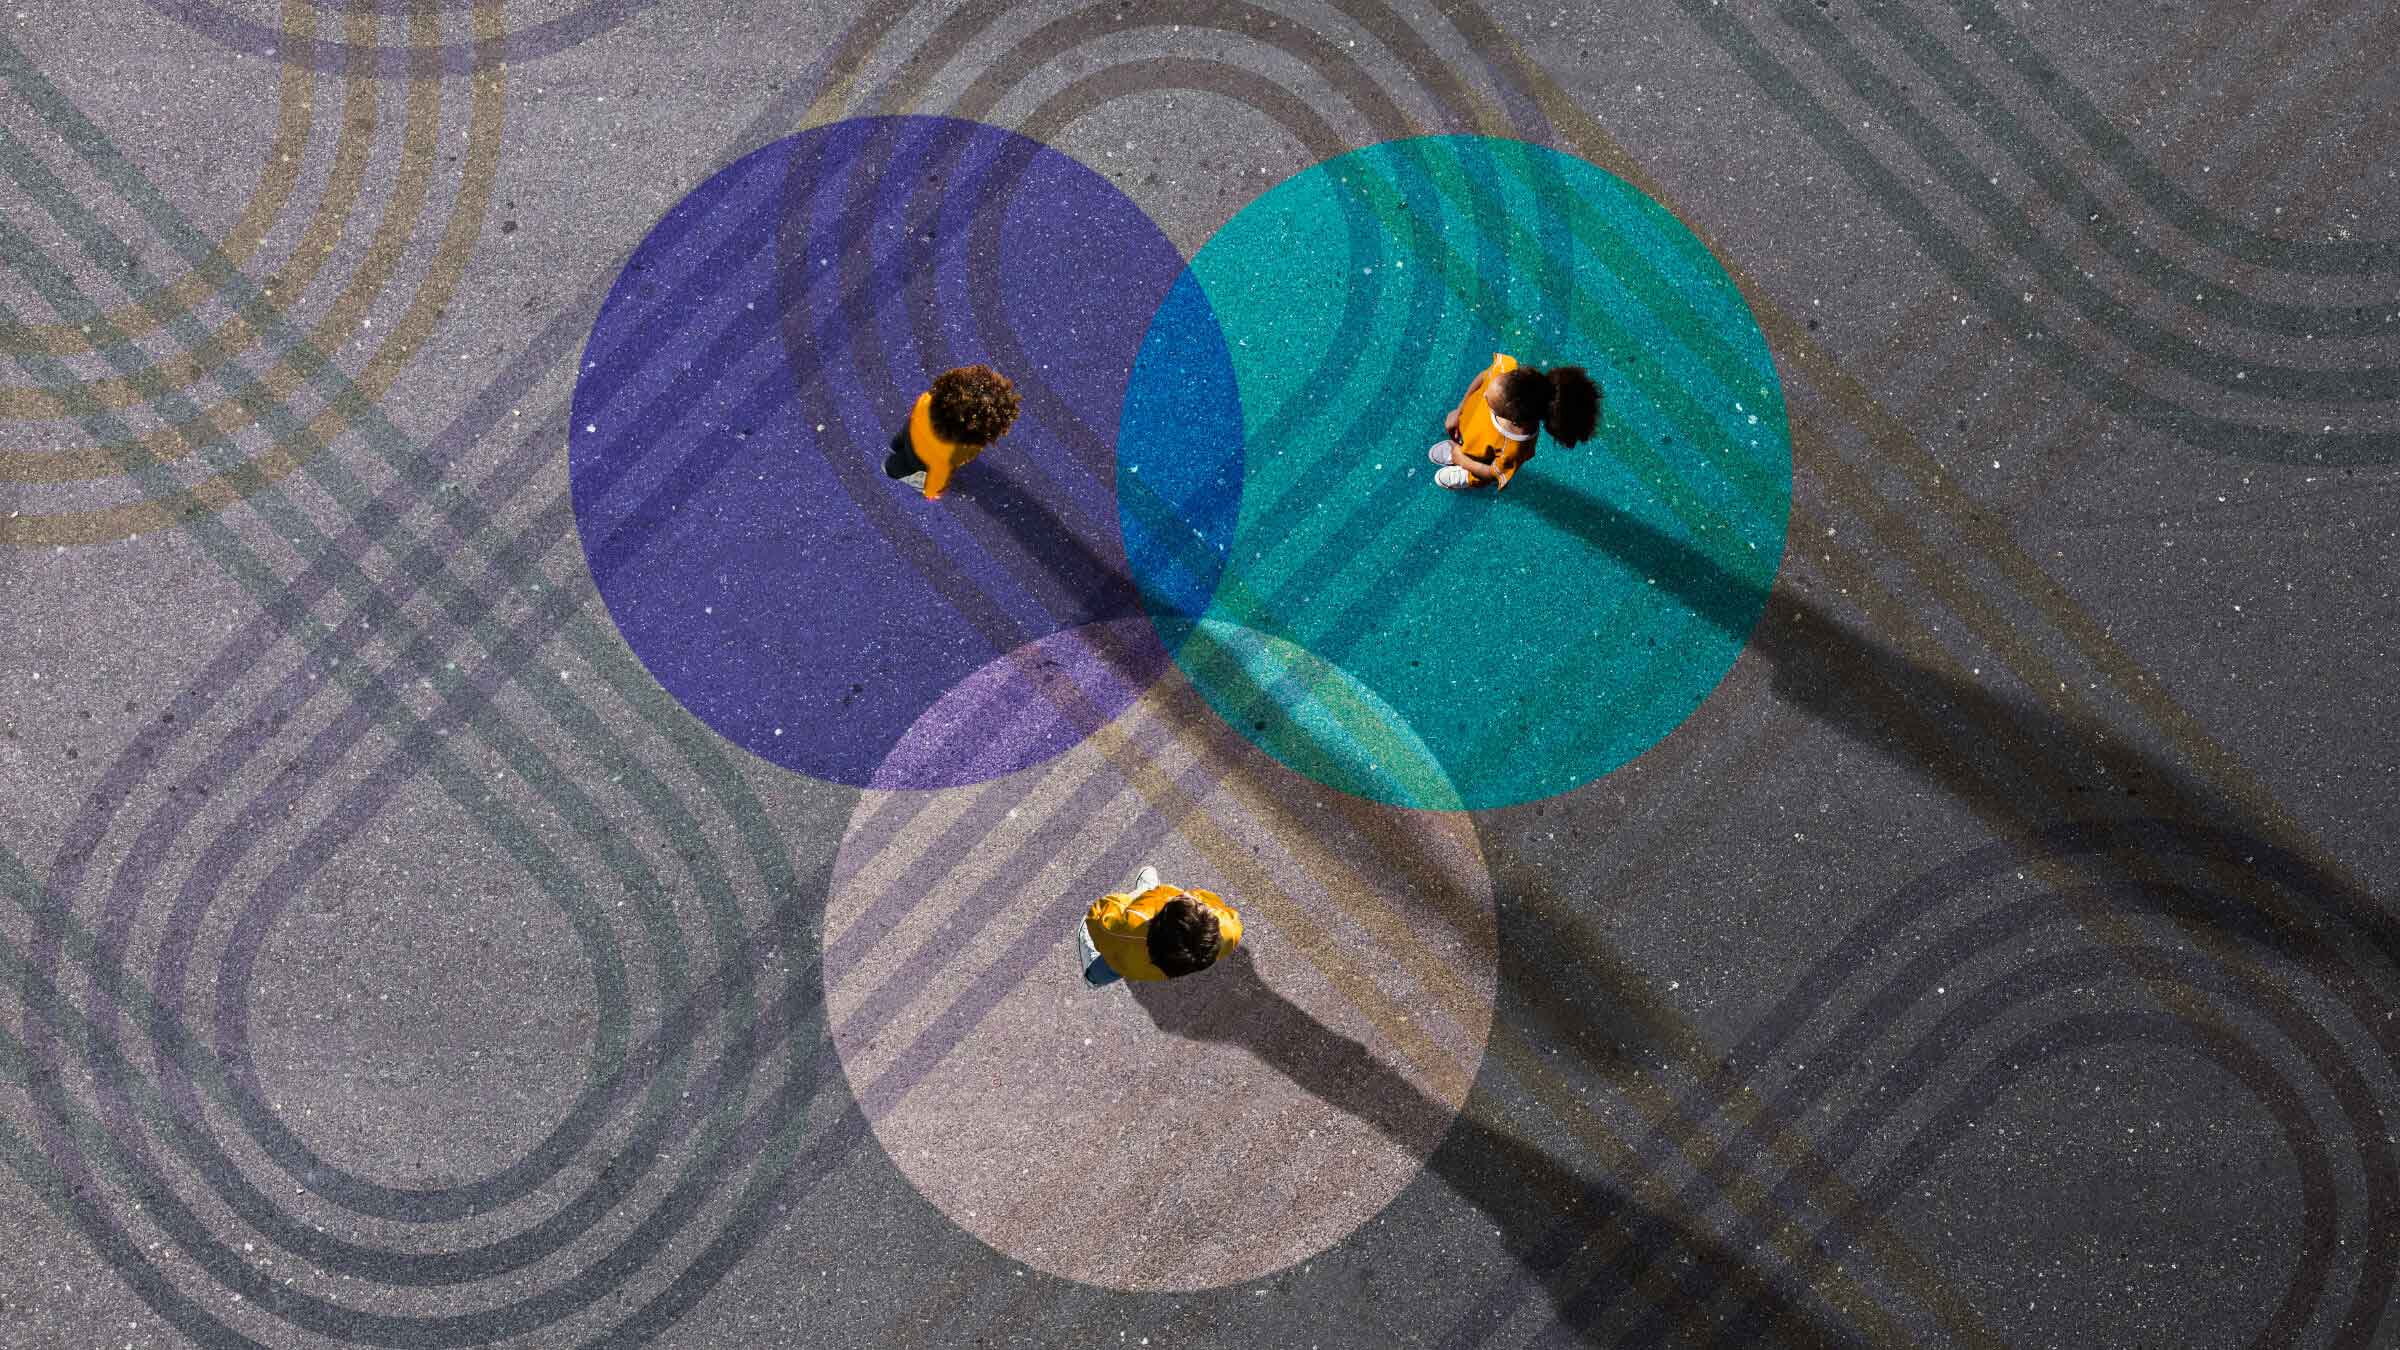 Bird's eye view of three people in overlapping circle graphics with geometric pattern all around